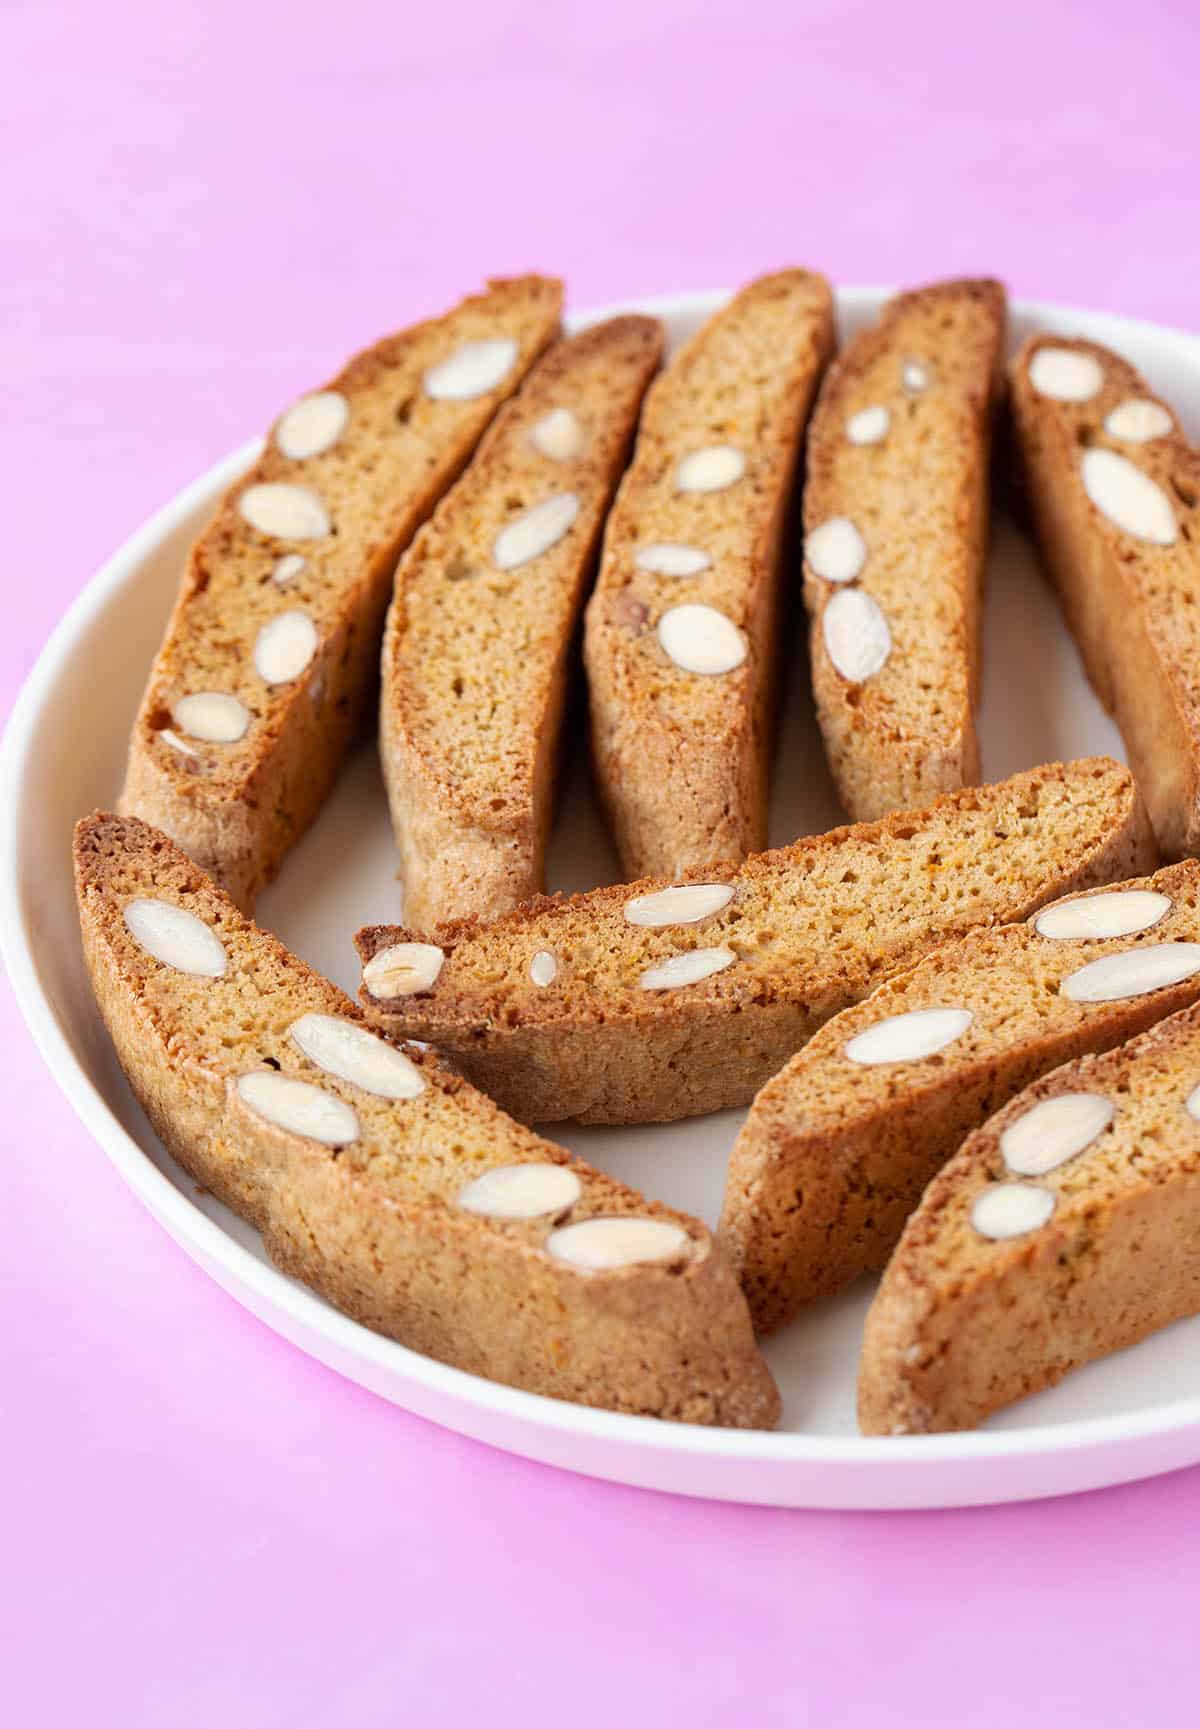 A plate of homemade Orange Almond Biscotti on a pink backdrop.